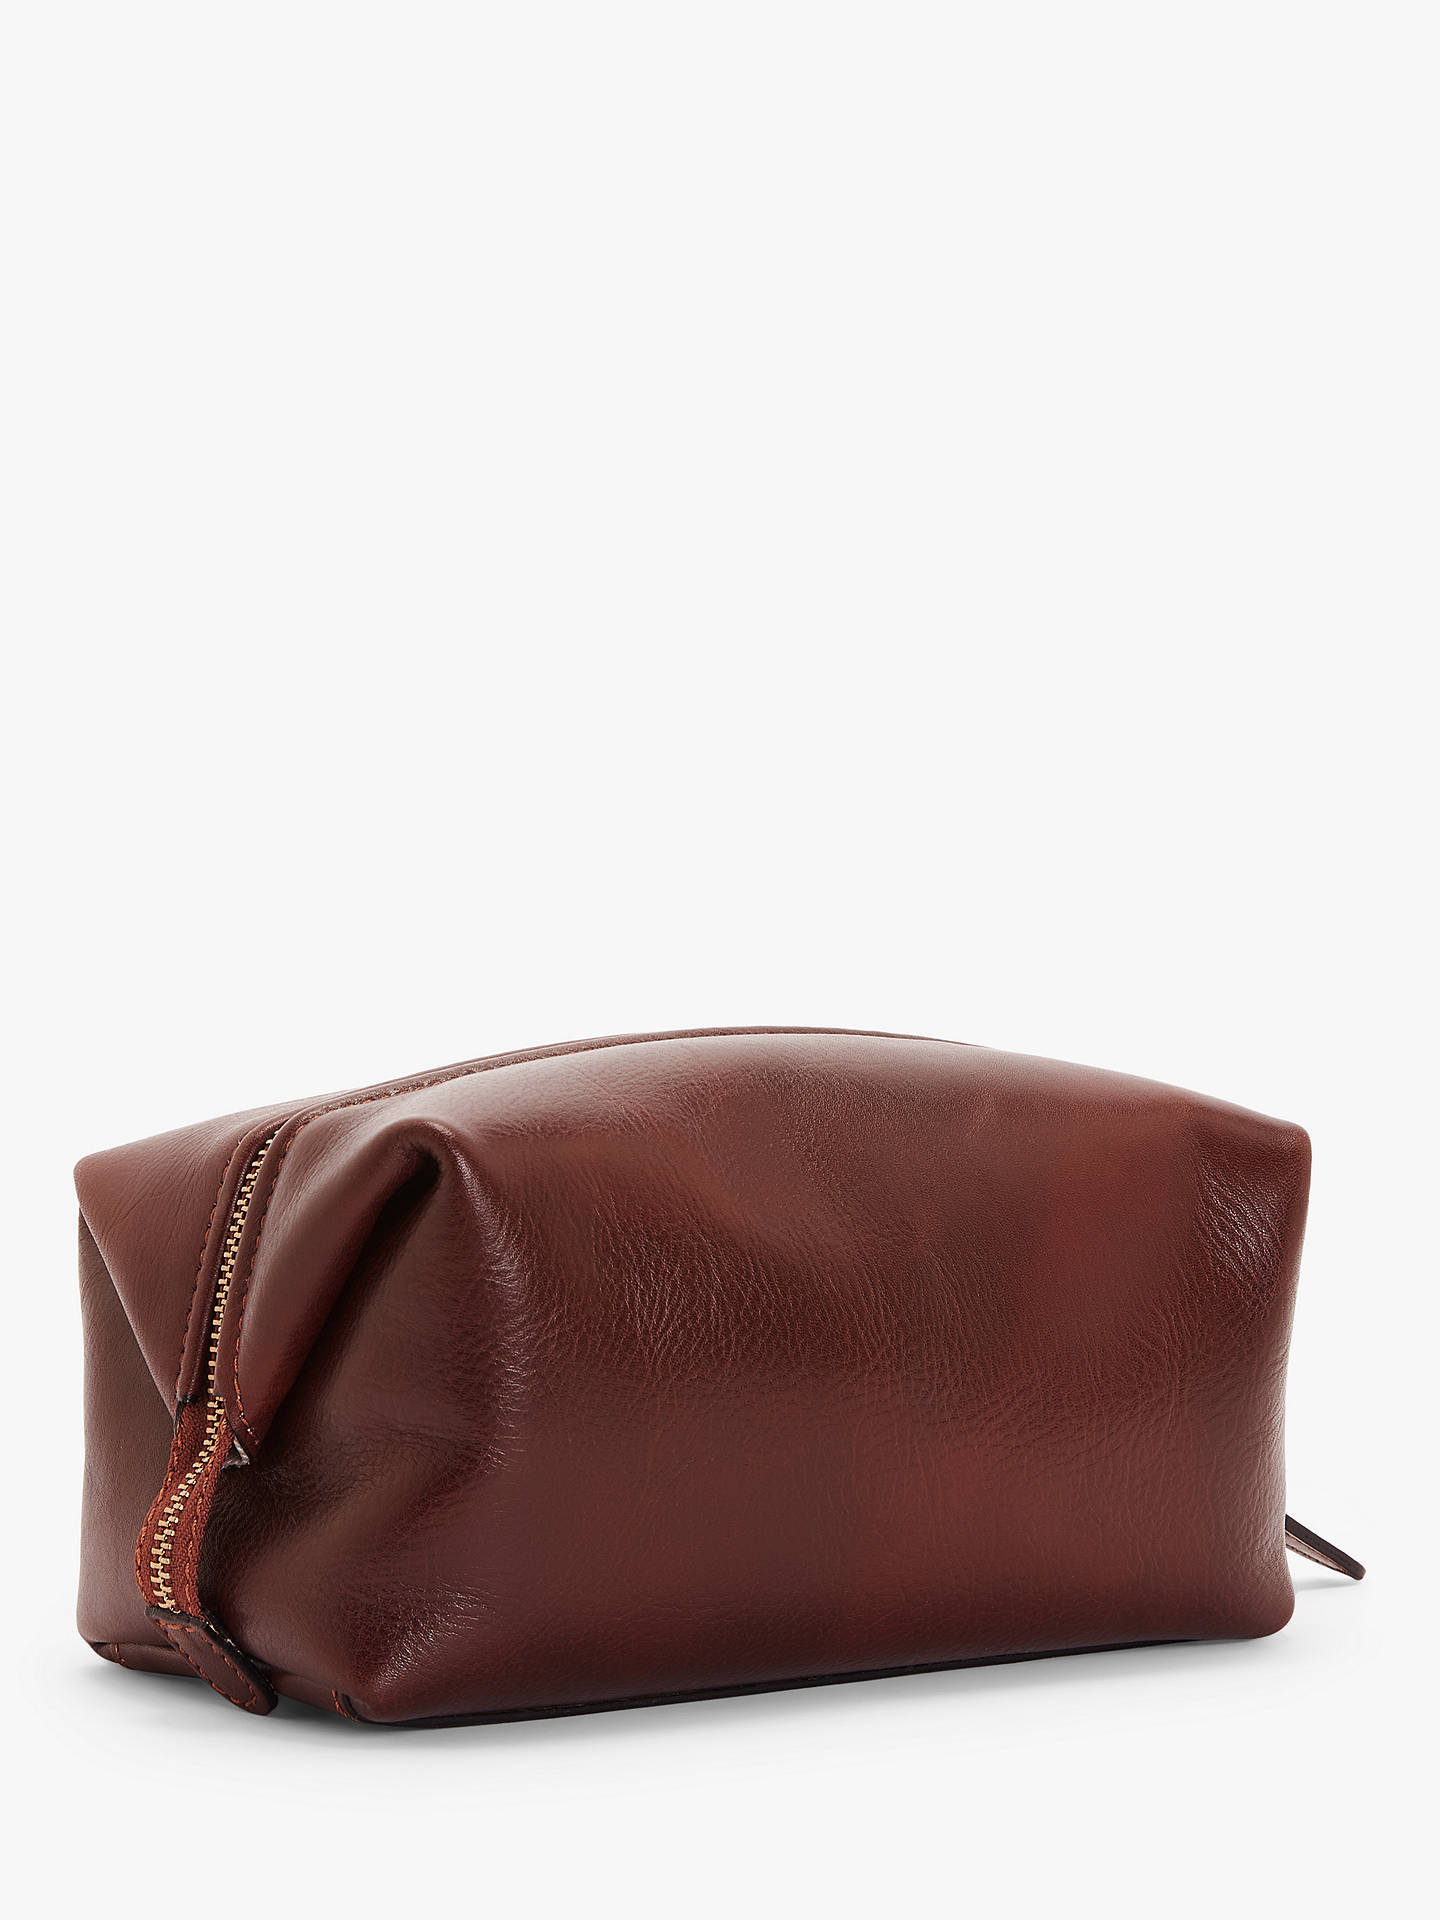 John Lewis & Partners Made in Italy Leather Wash Bag, Brown at John ...